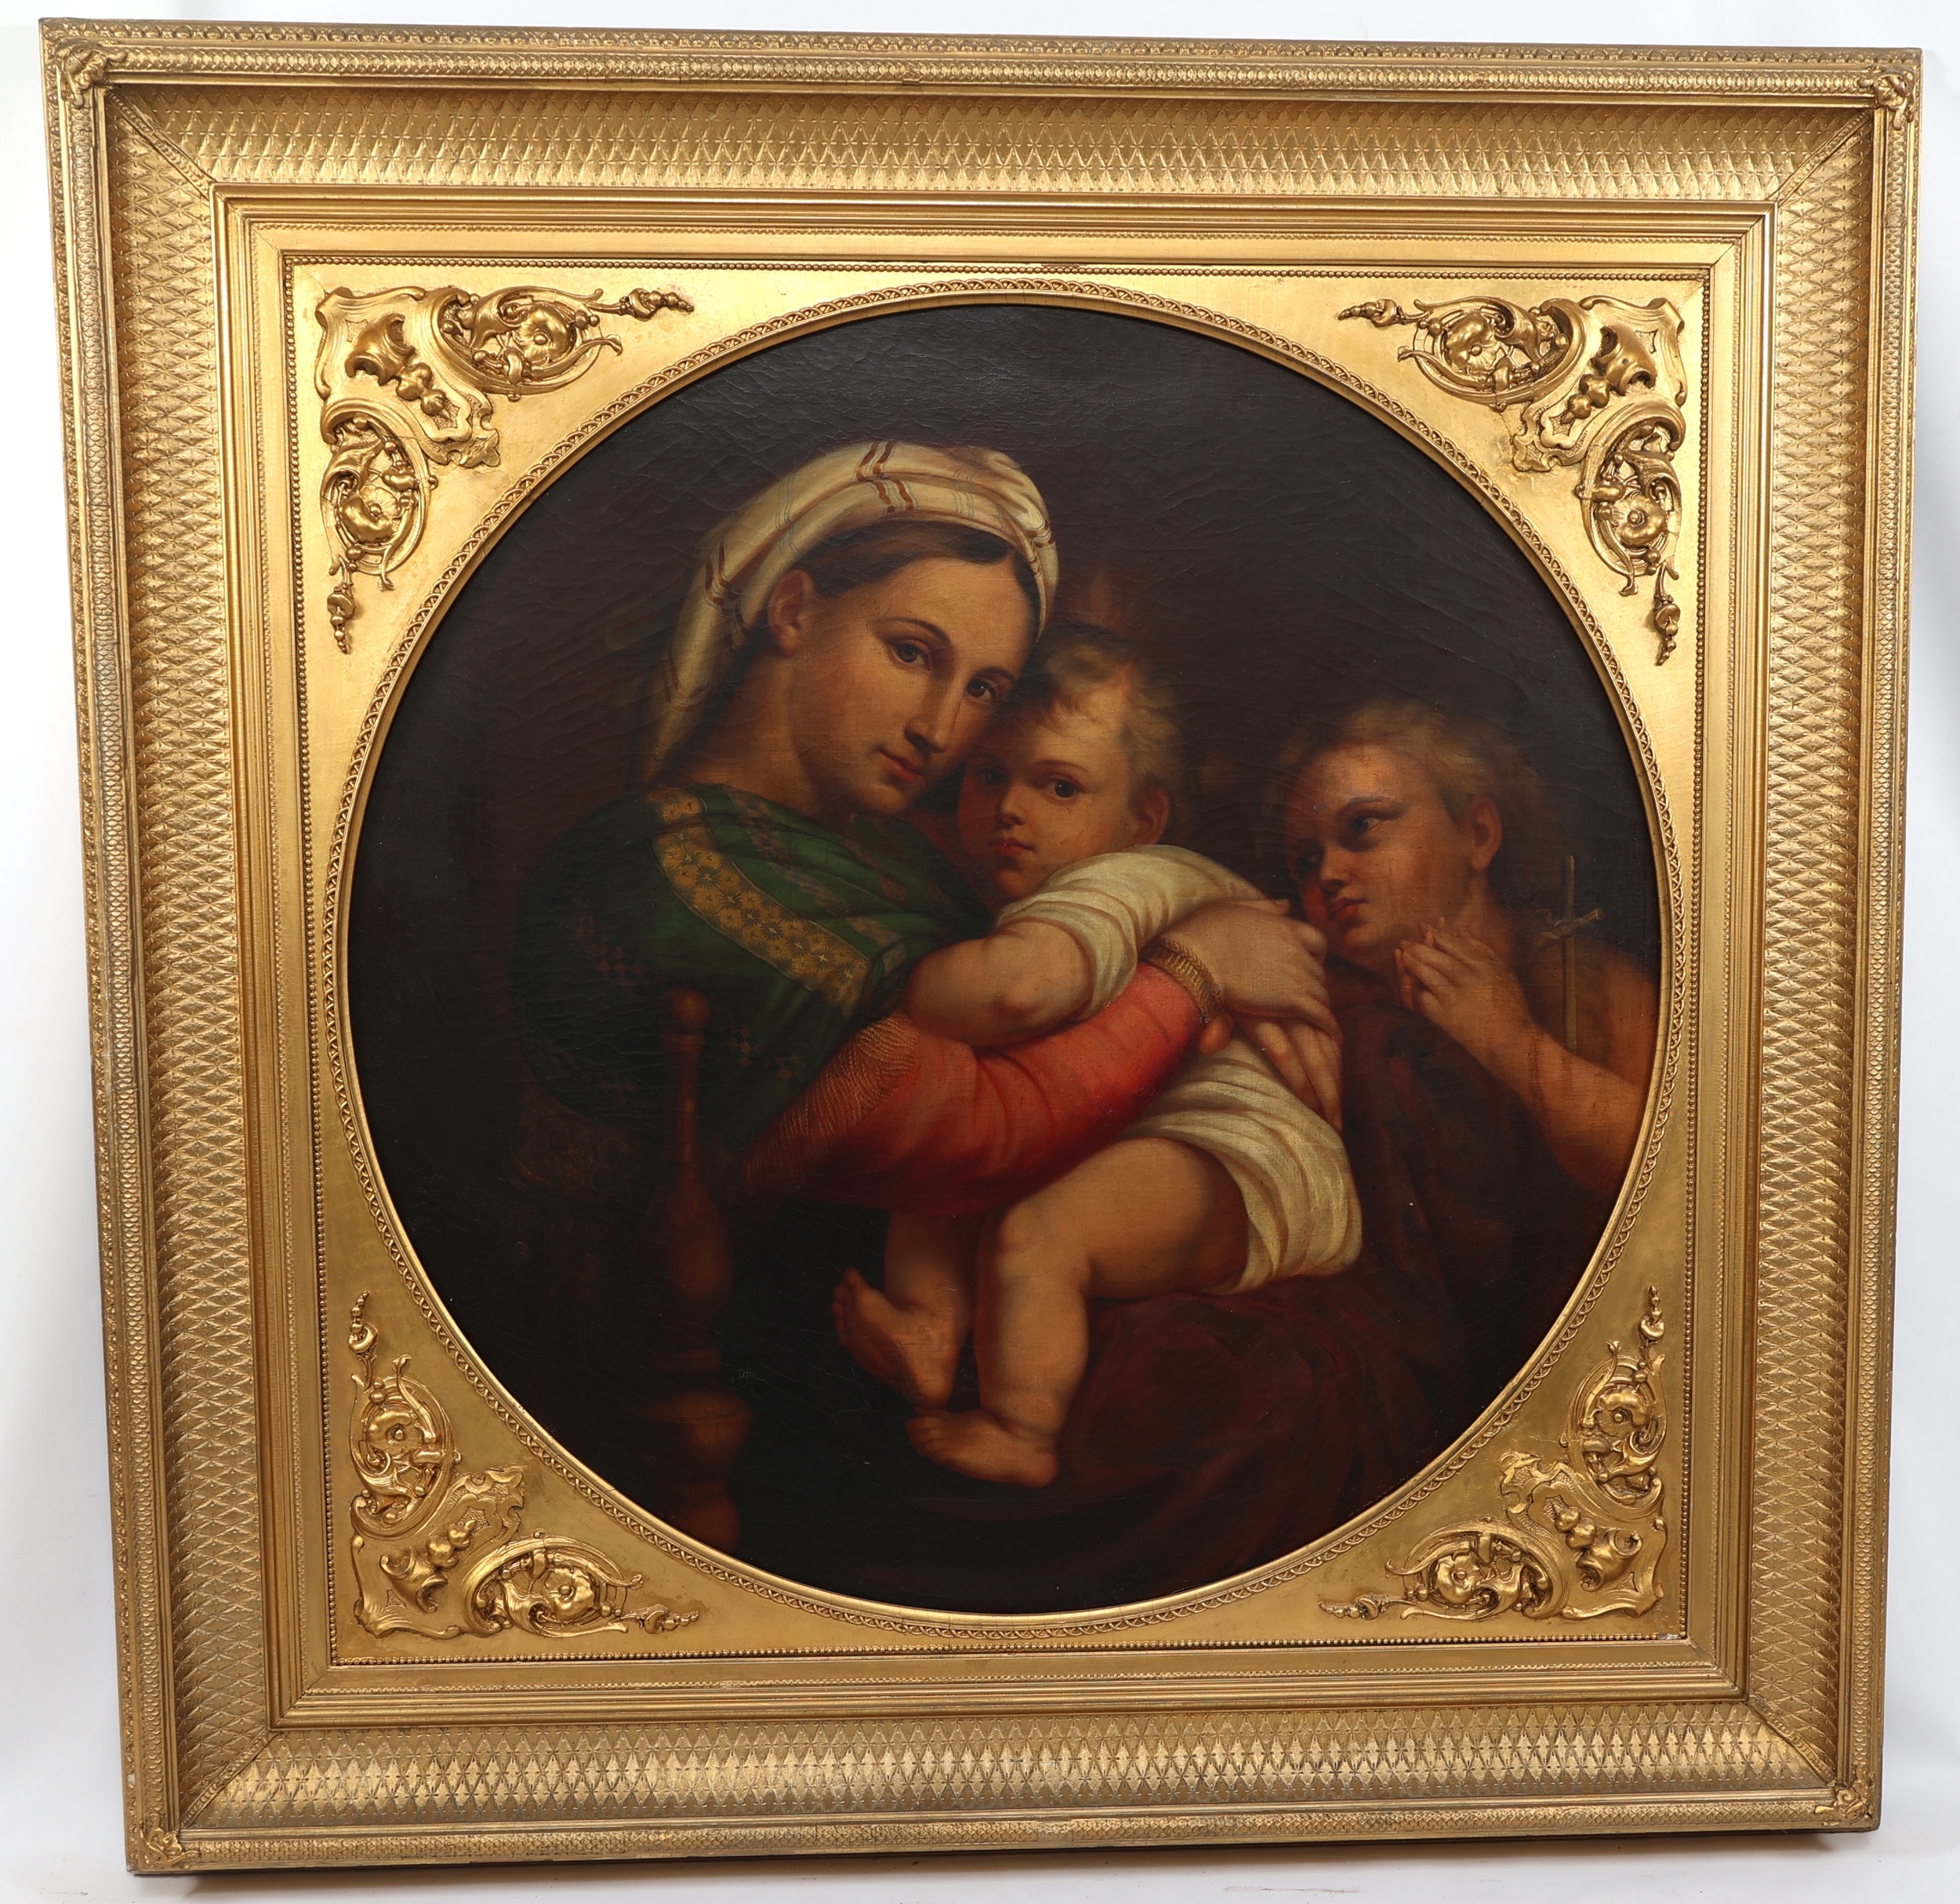 OIL ON CANVAS AFTER RAPHAEL'S MADONNA OF THE CHAIR by Raffaello Sanzio